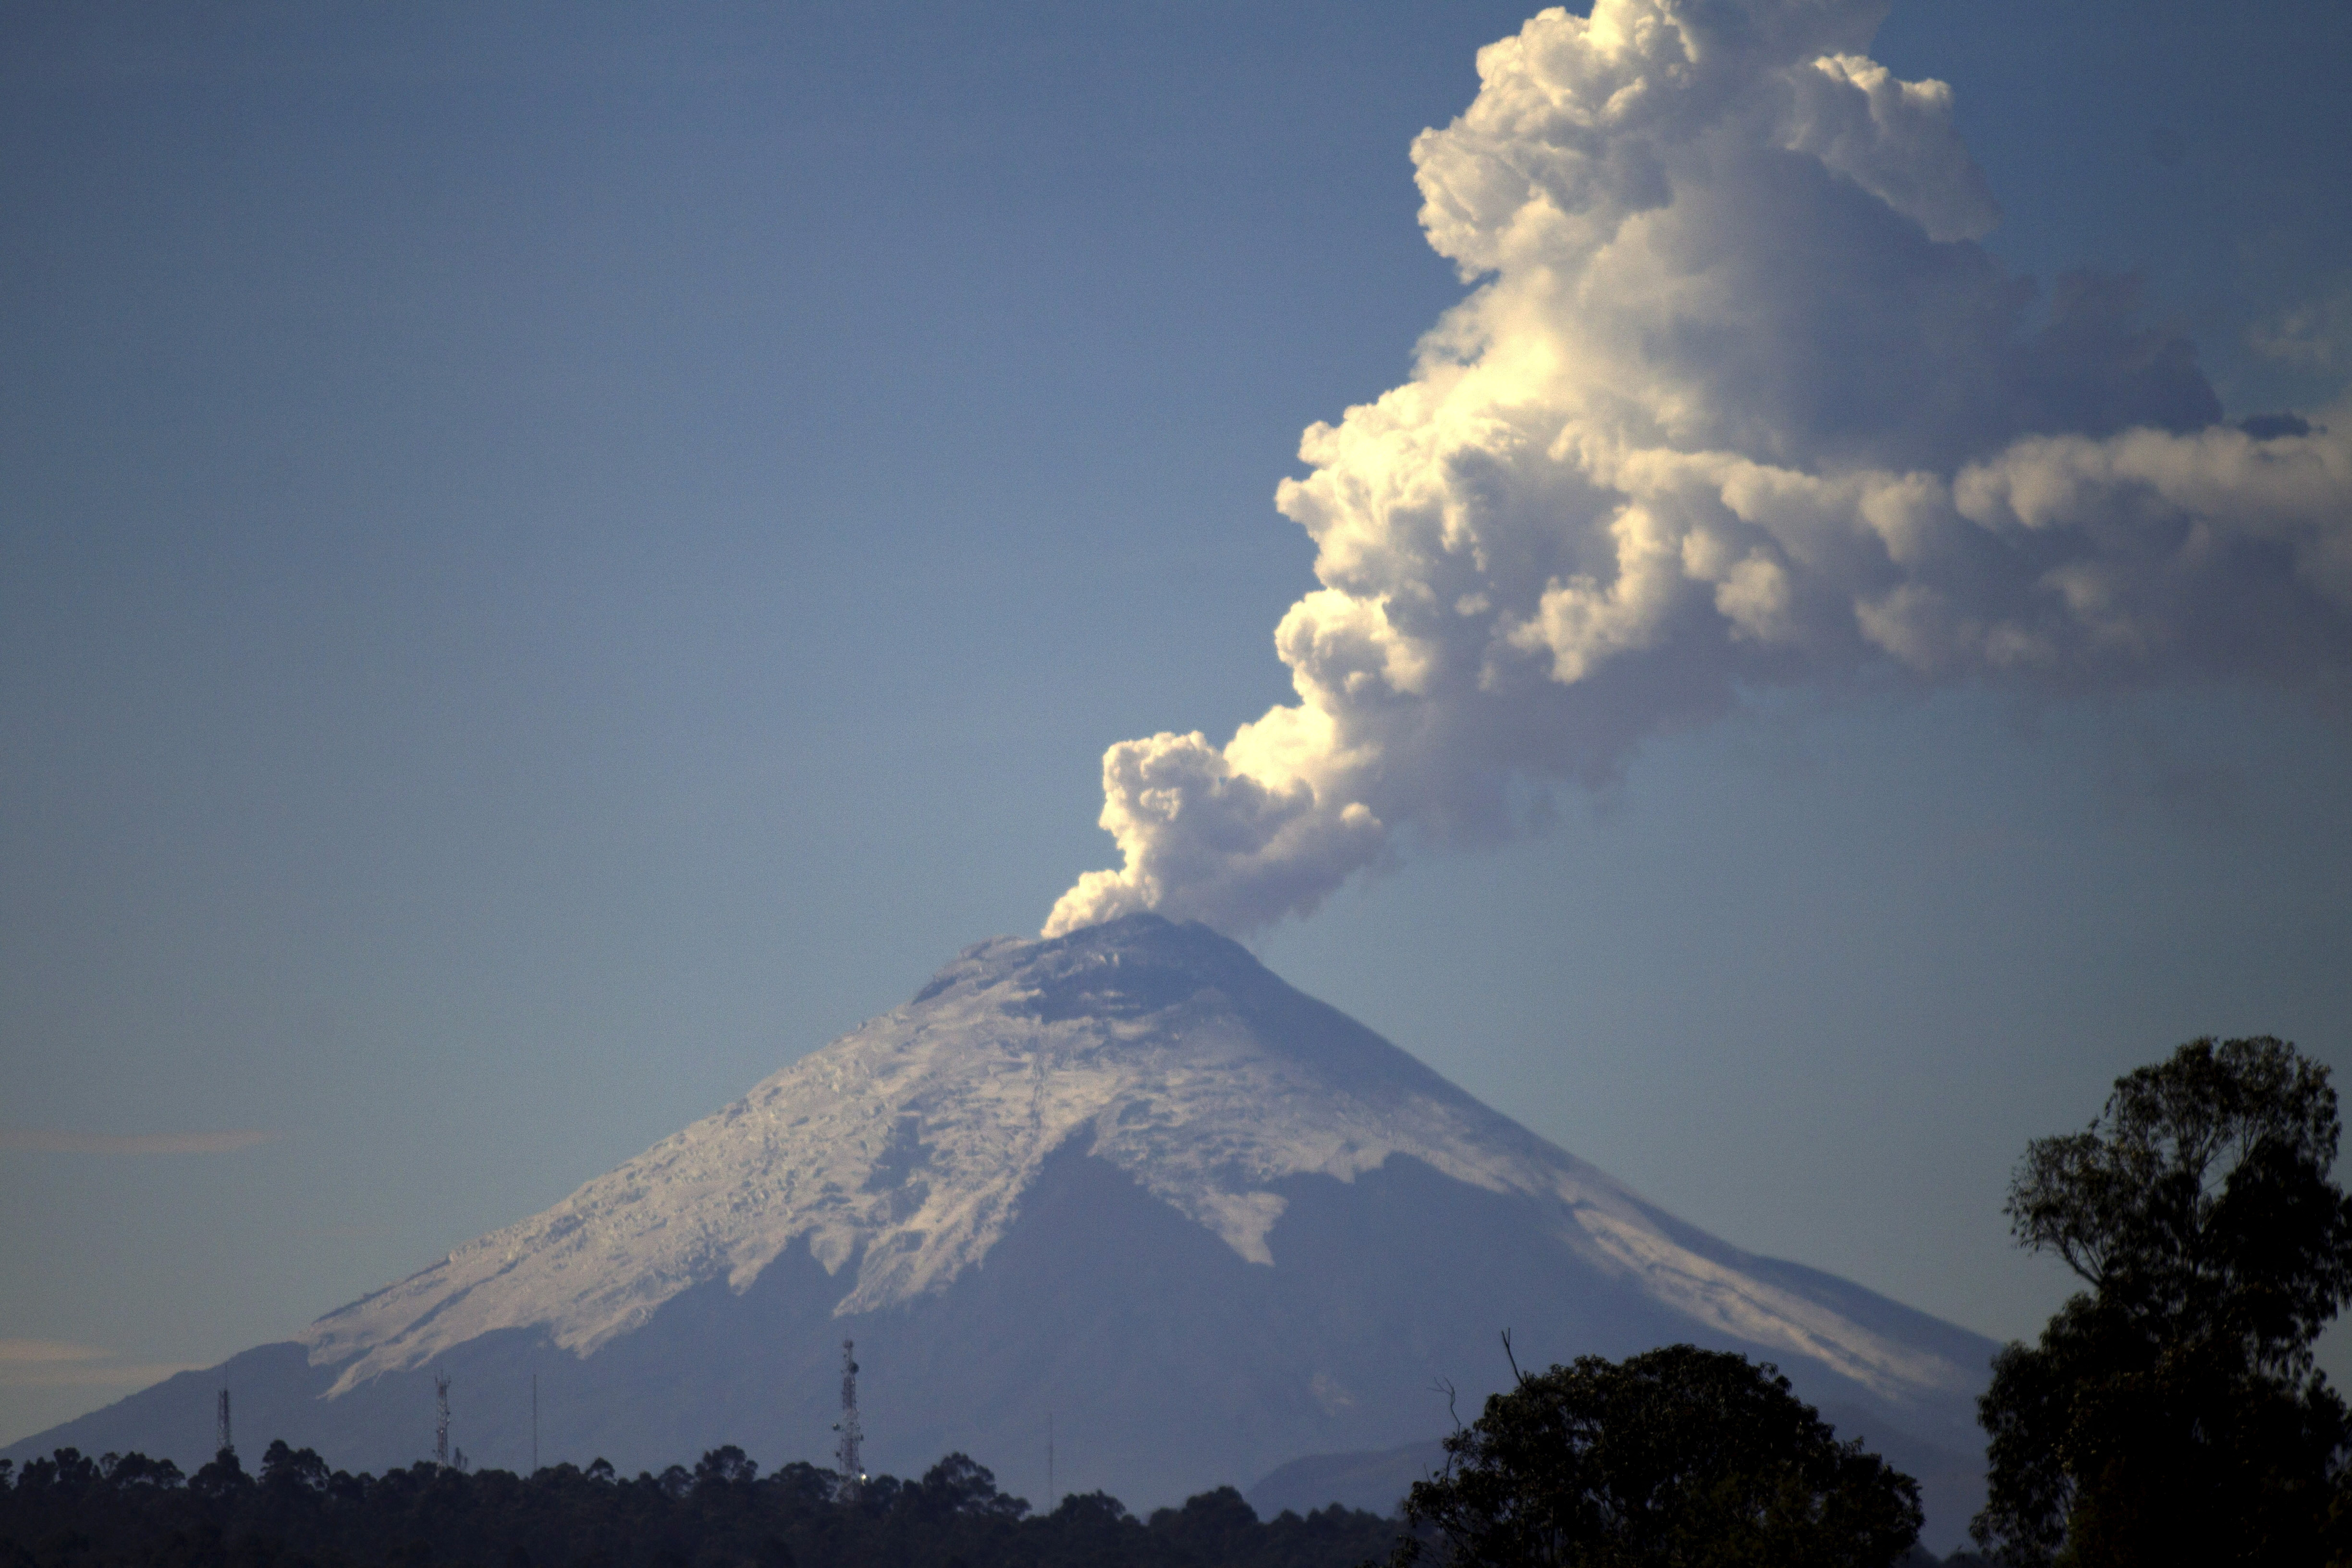 The Cotopaxi Volcano, one of the world's highest active volcanoes in Ecuador is seen from Quito